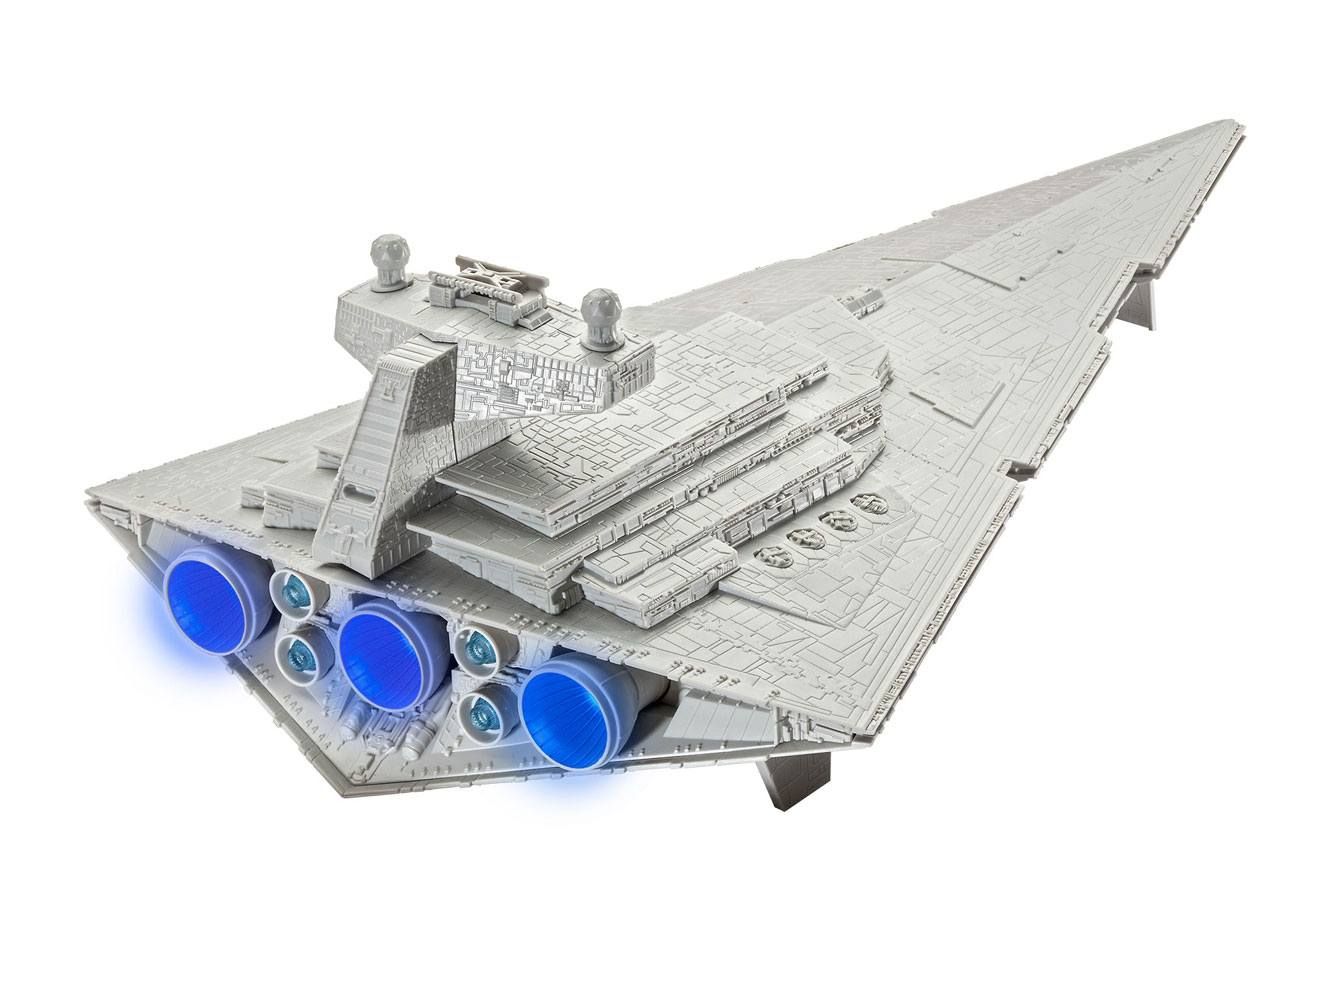 Star Wars Build & Play Model Kit with Sound & Light Up 1/4000 Imperial Star Destroyer Revell